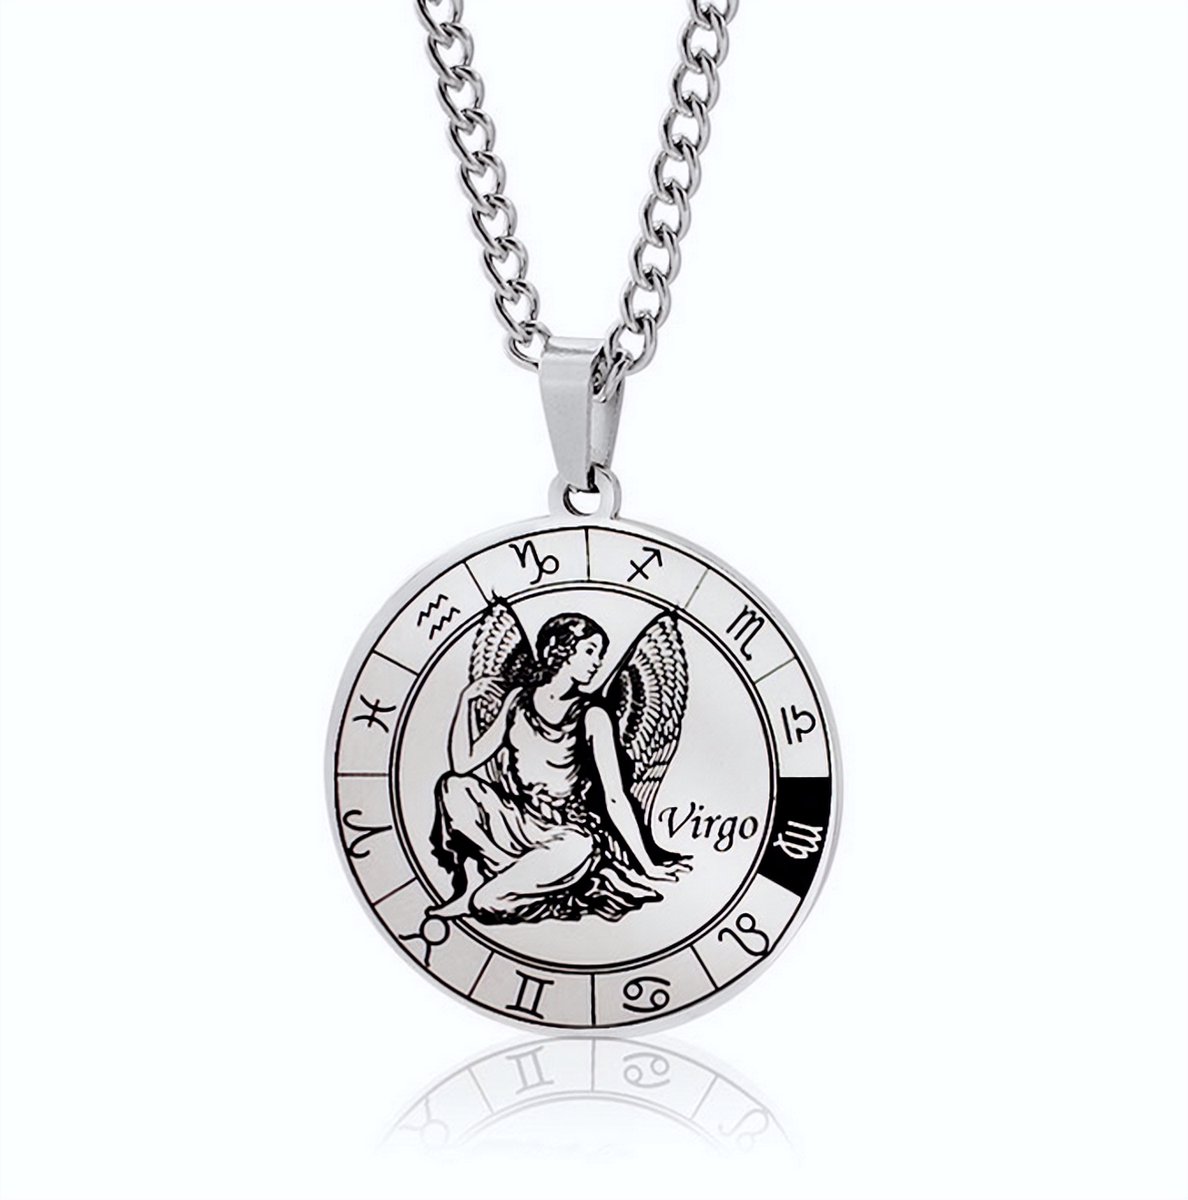 ICYBOY 18K Roestvrije Stalen Ketting Met Ronde Zodiac Sterrenbeeld Pendant [Maagd] [60 cm] Silver Plating Stainless Steel Round Horoscope Pendant Necklace